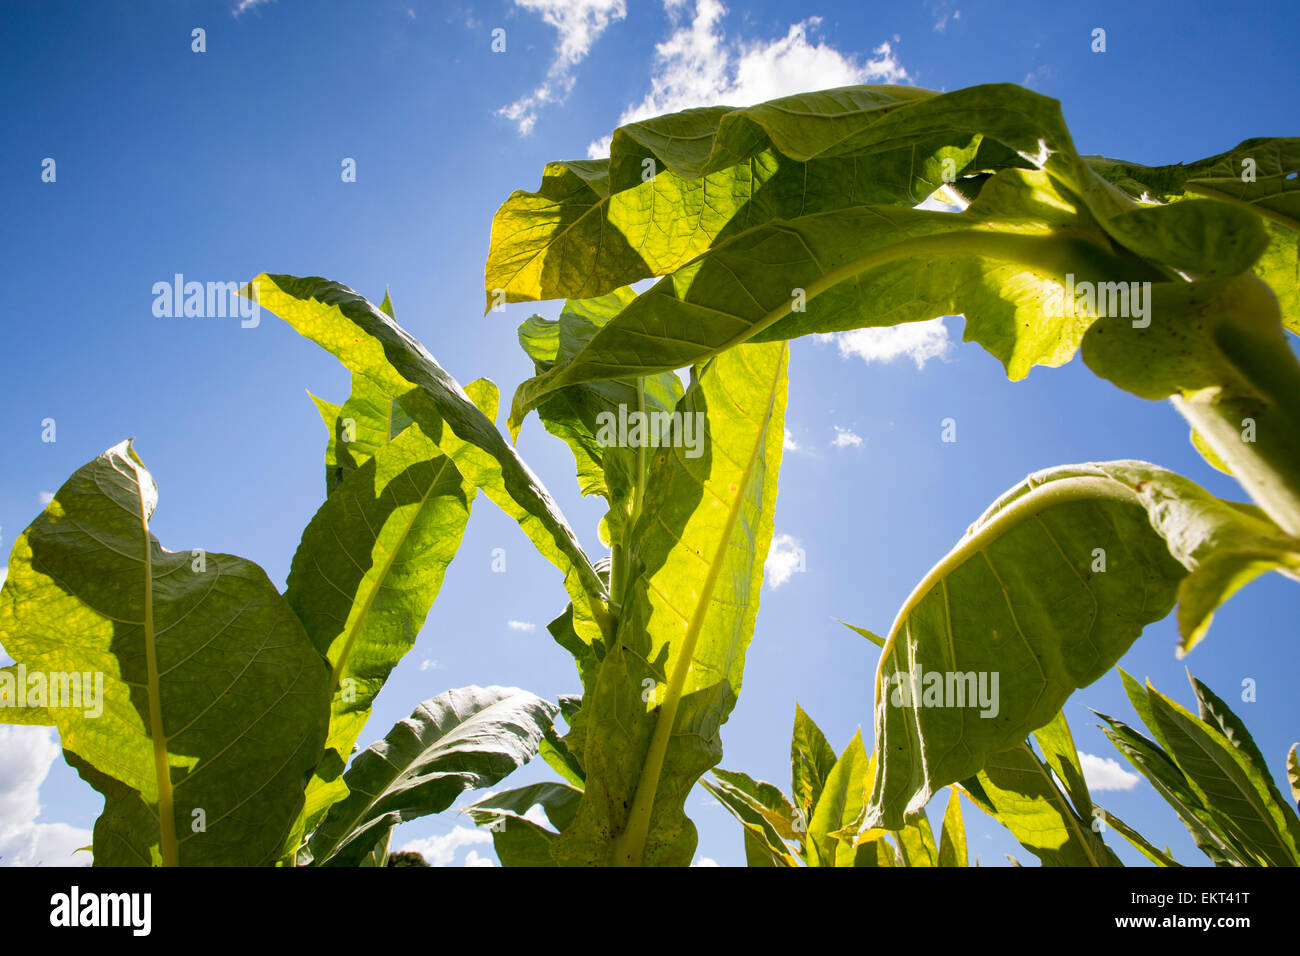 Tobacco being grown as a cash crop in Malawi, Africa. Stock Photo